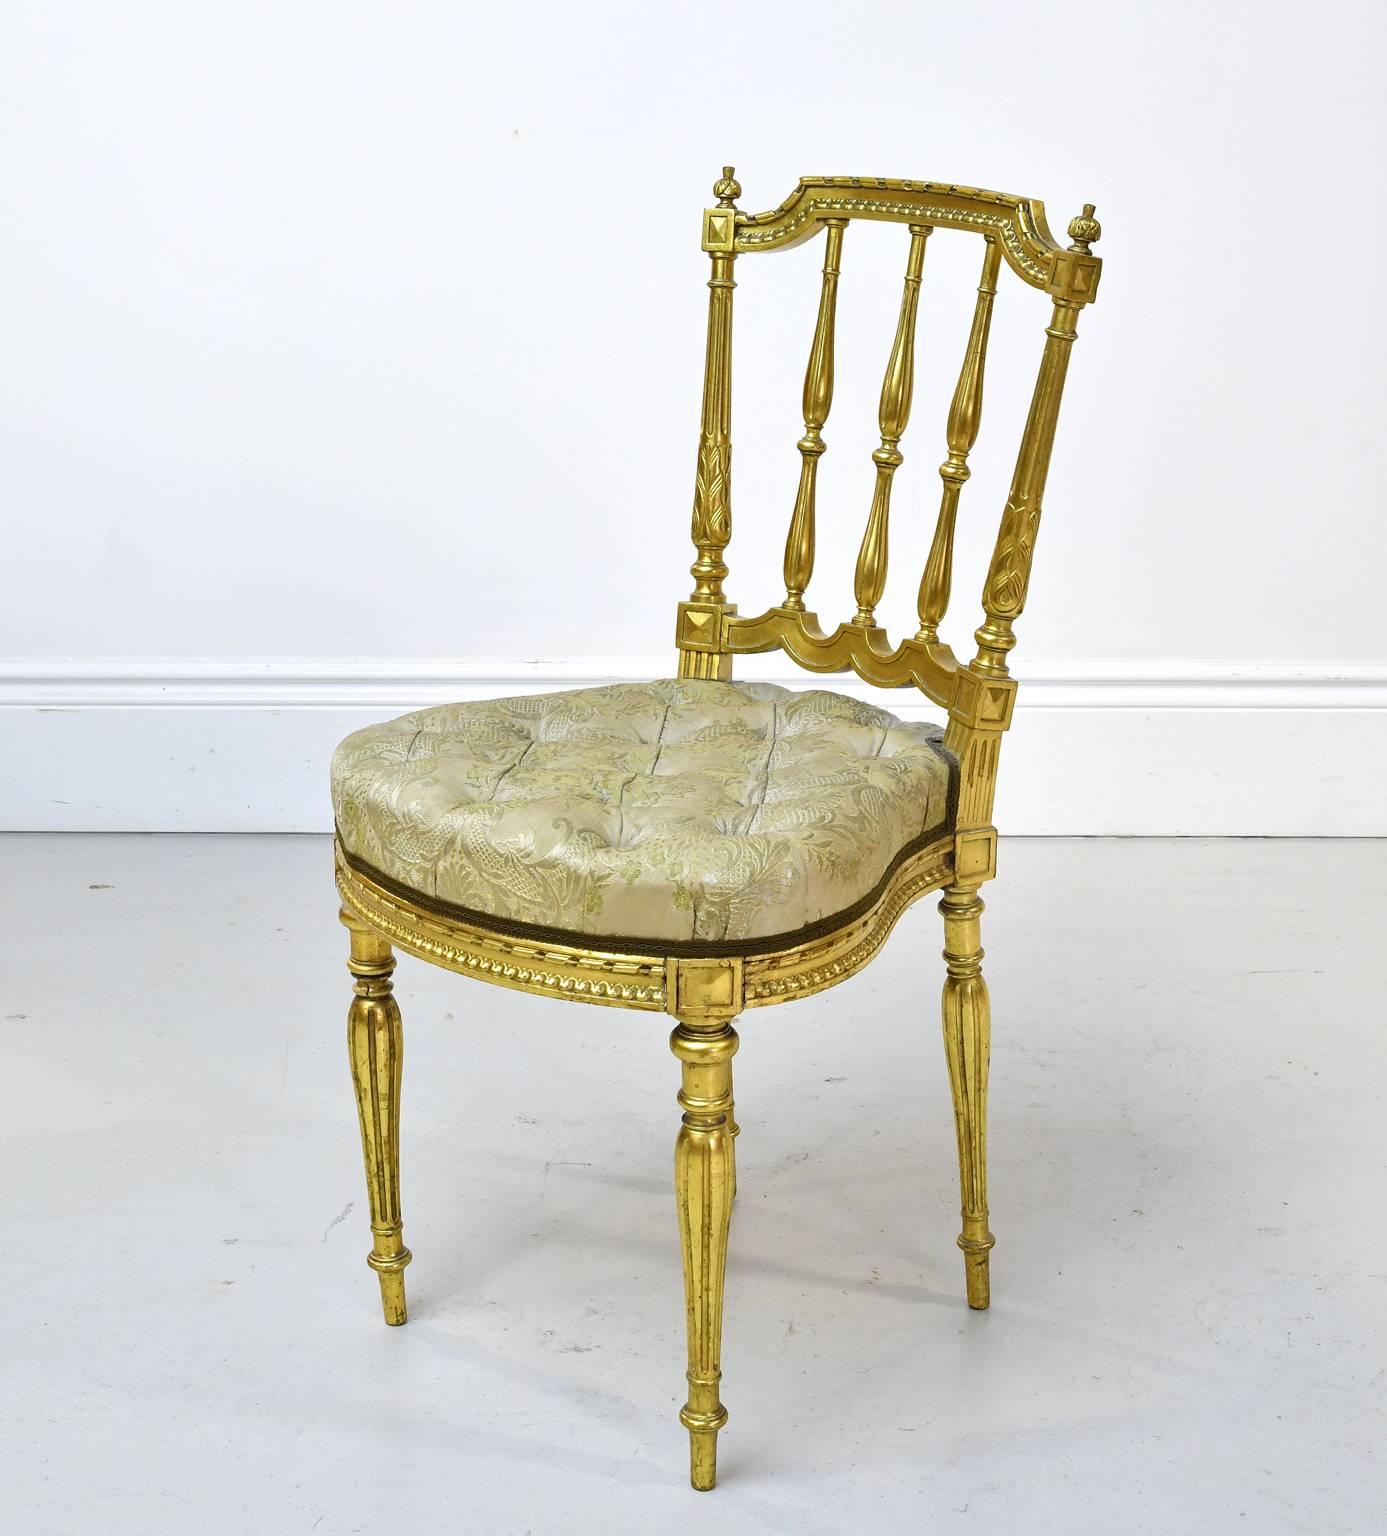 A lovely Louis XVI style salon chair in giltwood (gold leaf applied over wood) with spindle-back, turned & reeded legs, carved & round-shaped seat rail with tufted upholstery. Belle Époque France, circa 1890-1900. A beautiful chair for a dressing